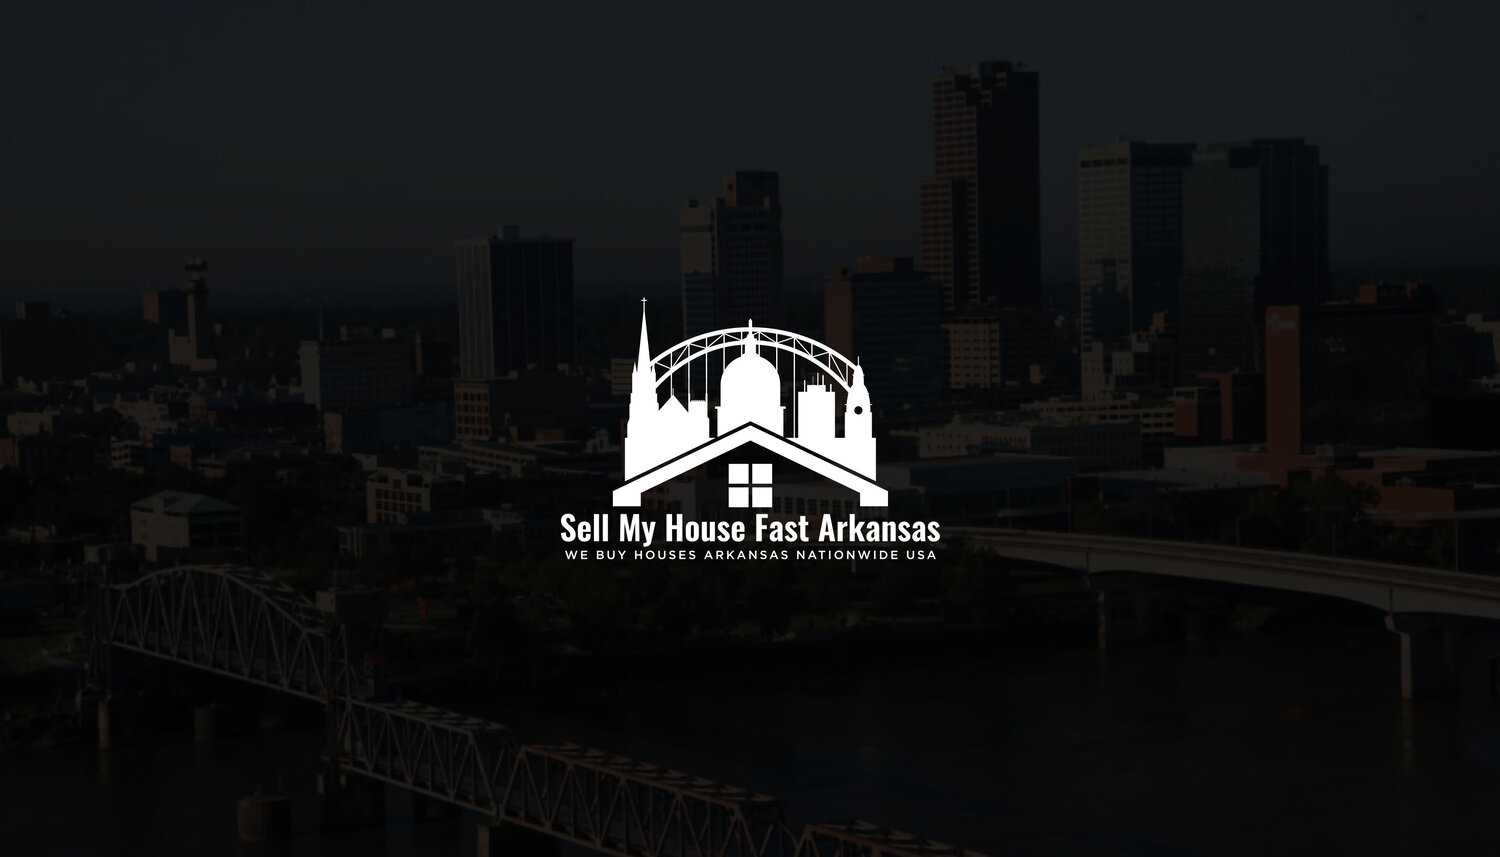 Sell My House Fast Arkansas & Nationwide USA | We Buy Houses Arkansas | Sell House Cash Arkansas | Cash for Houses AR | We Buy Houses Near Me